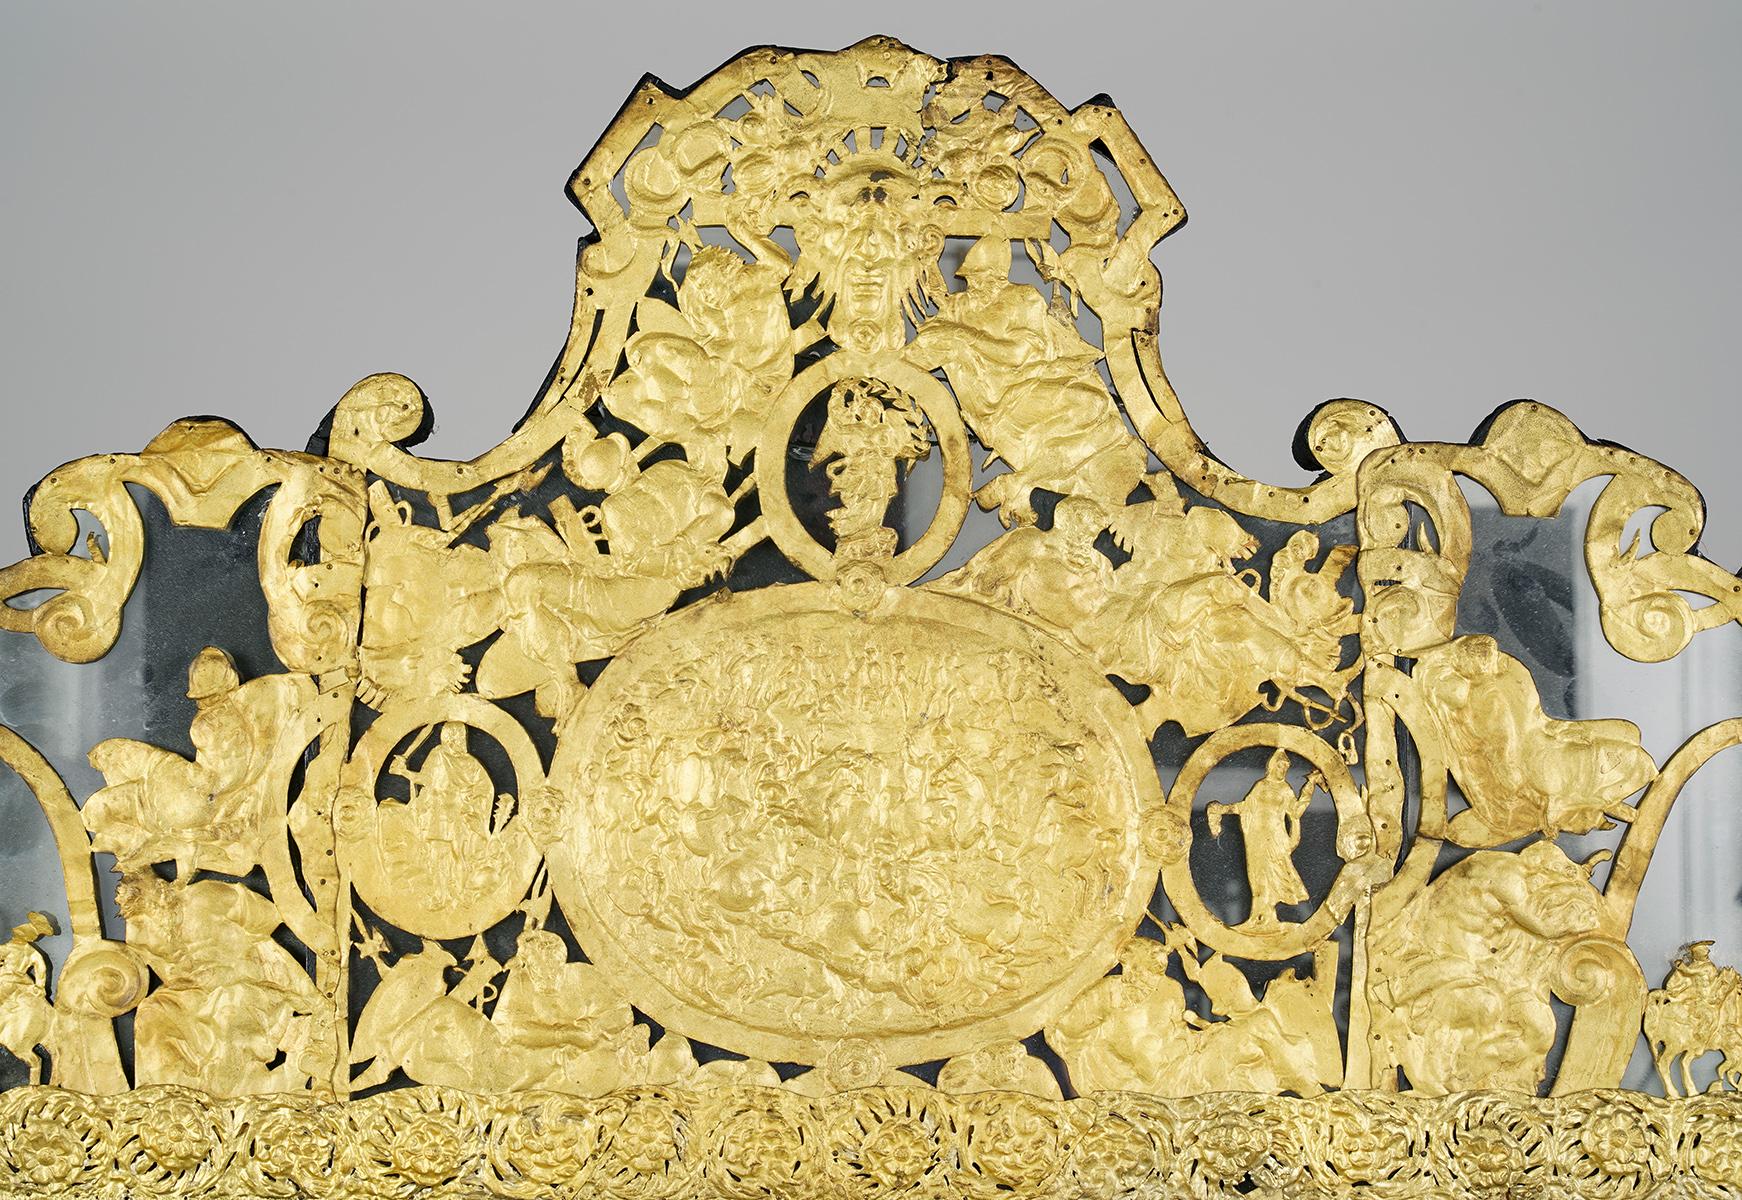 This 19th century Dutch Baroque style mirror features an ebonizes wood frame mounted with repousse gilt metal filigree overlay depicting leaf work, flowers, birds and traditional classical motifs. The raised designs were handcrafted using a